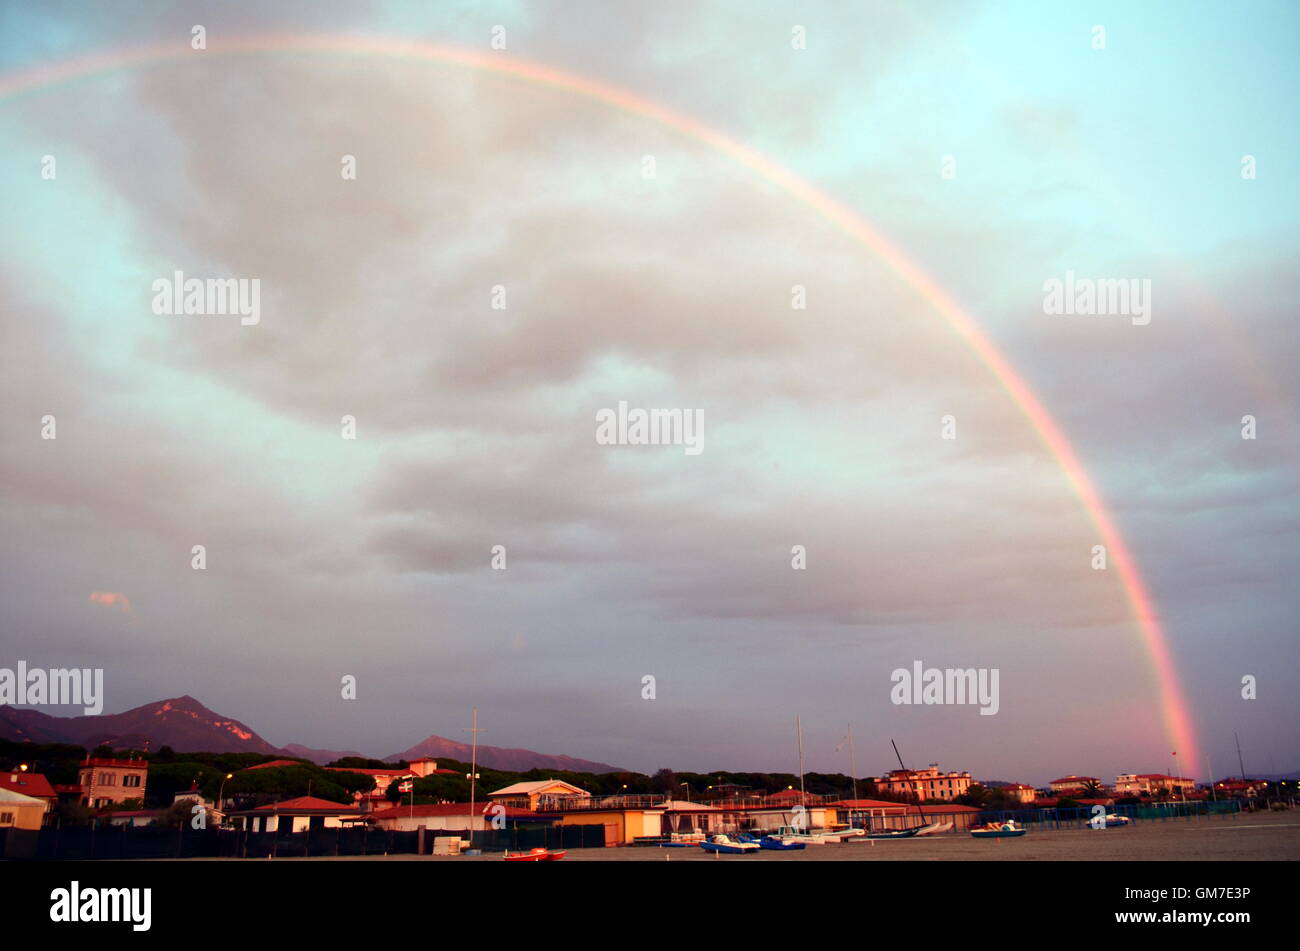 Rainbow is displayed across a sky after the storm Stock Photo